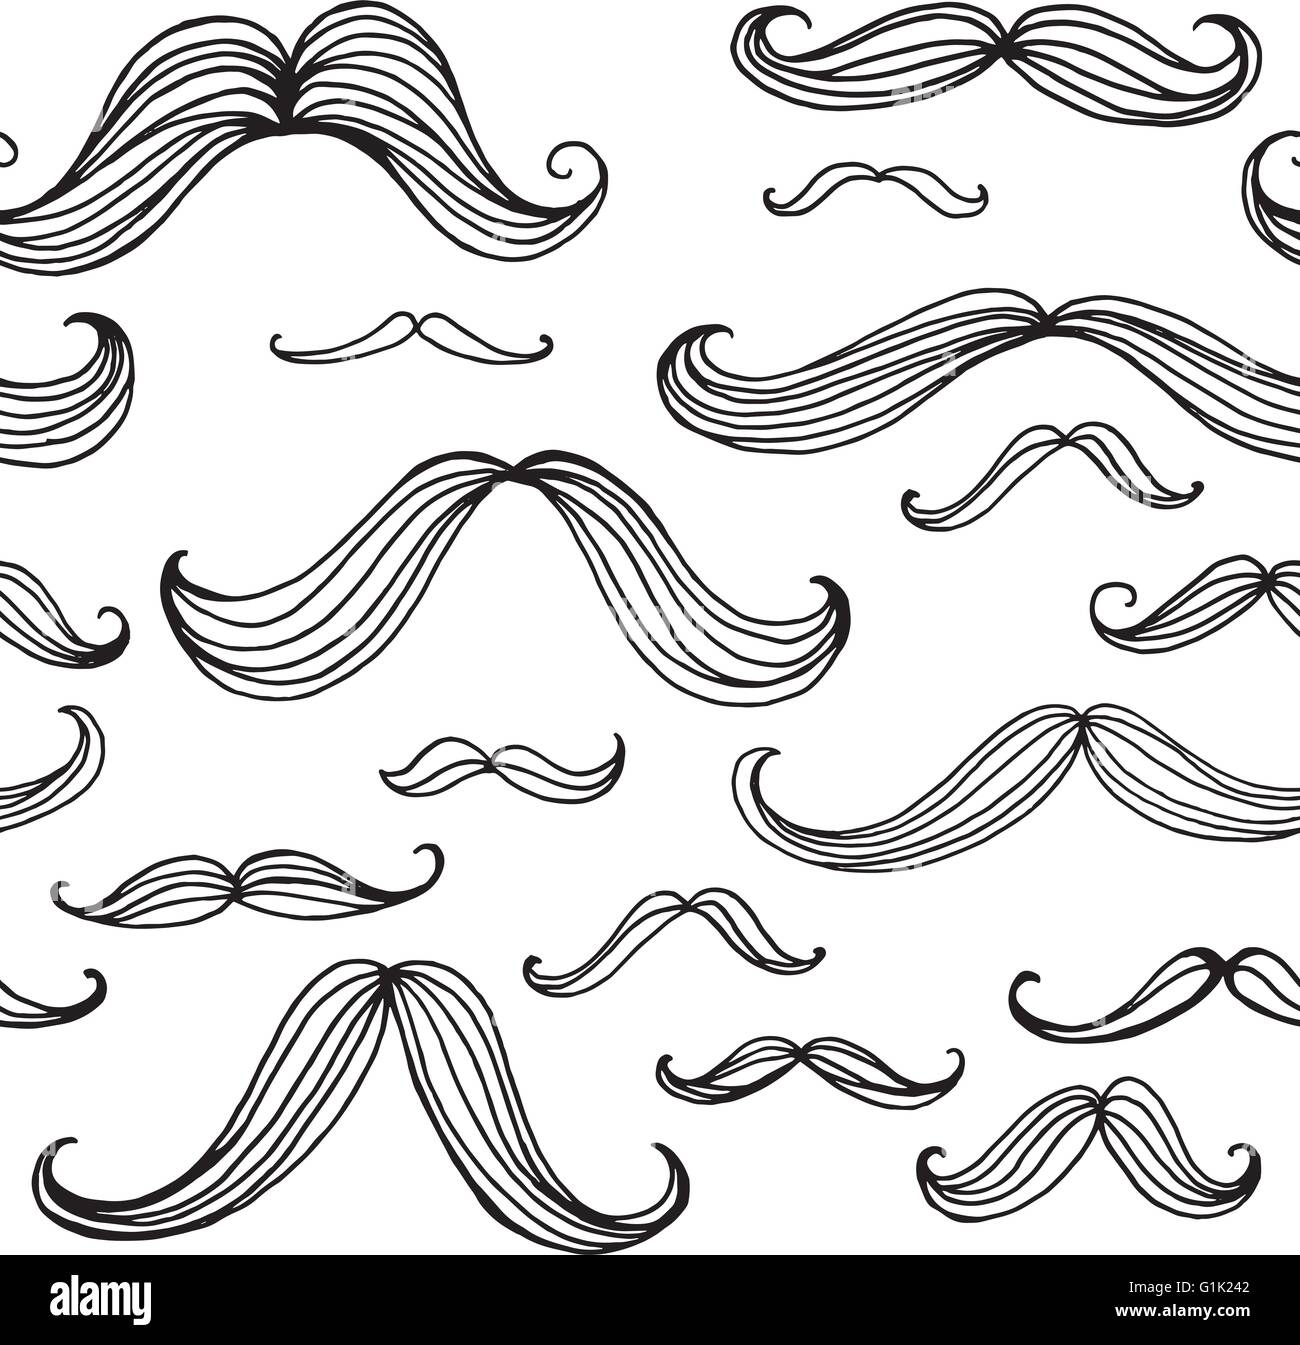 Mustaches seamless pattern. Hand drawn elements. Vector illustration Stock Vector